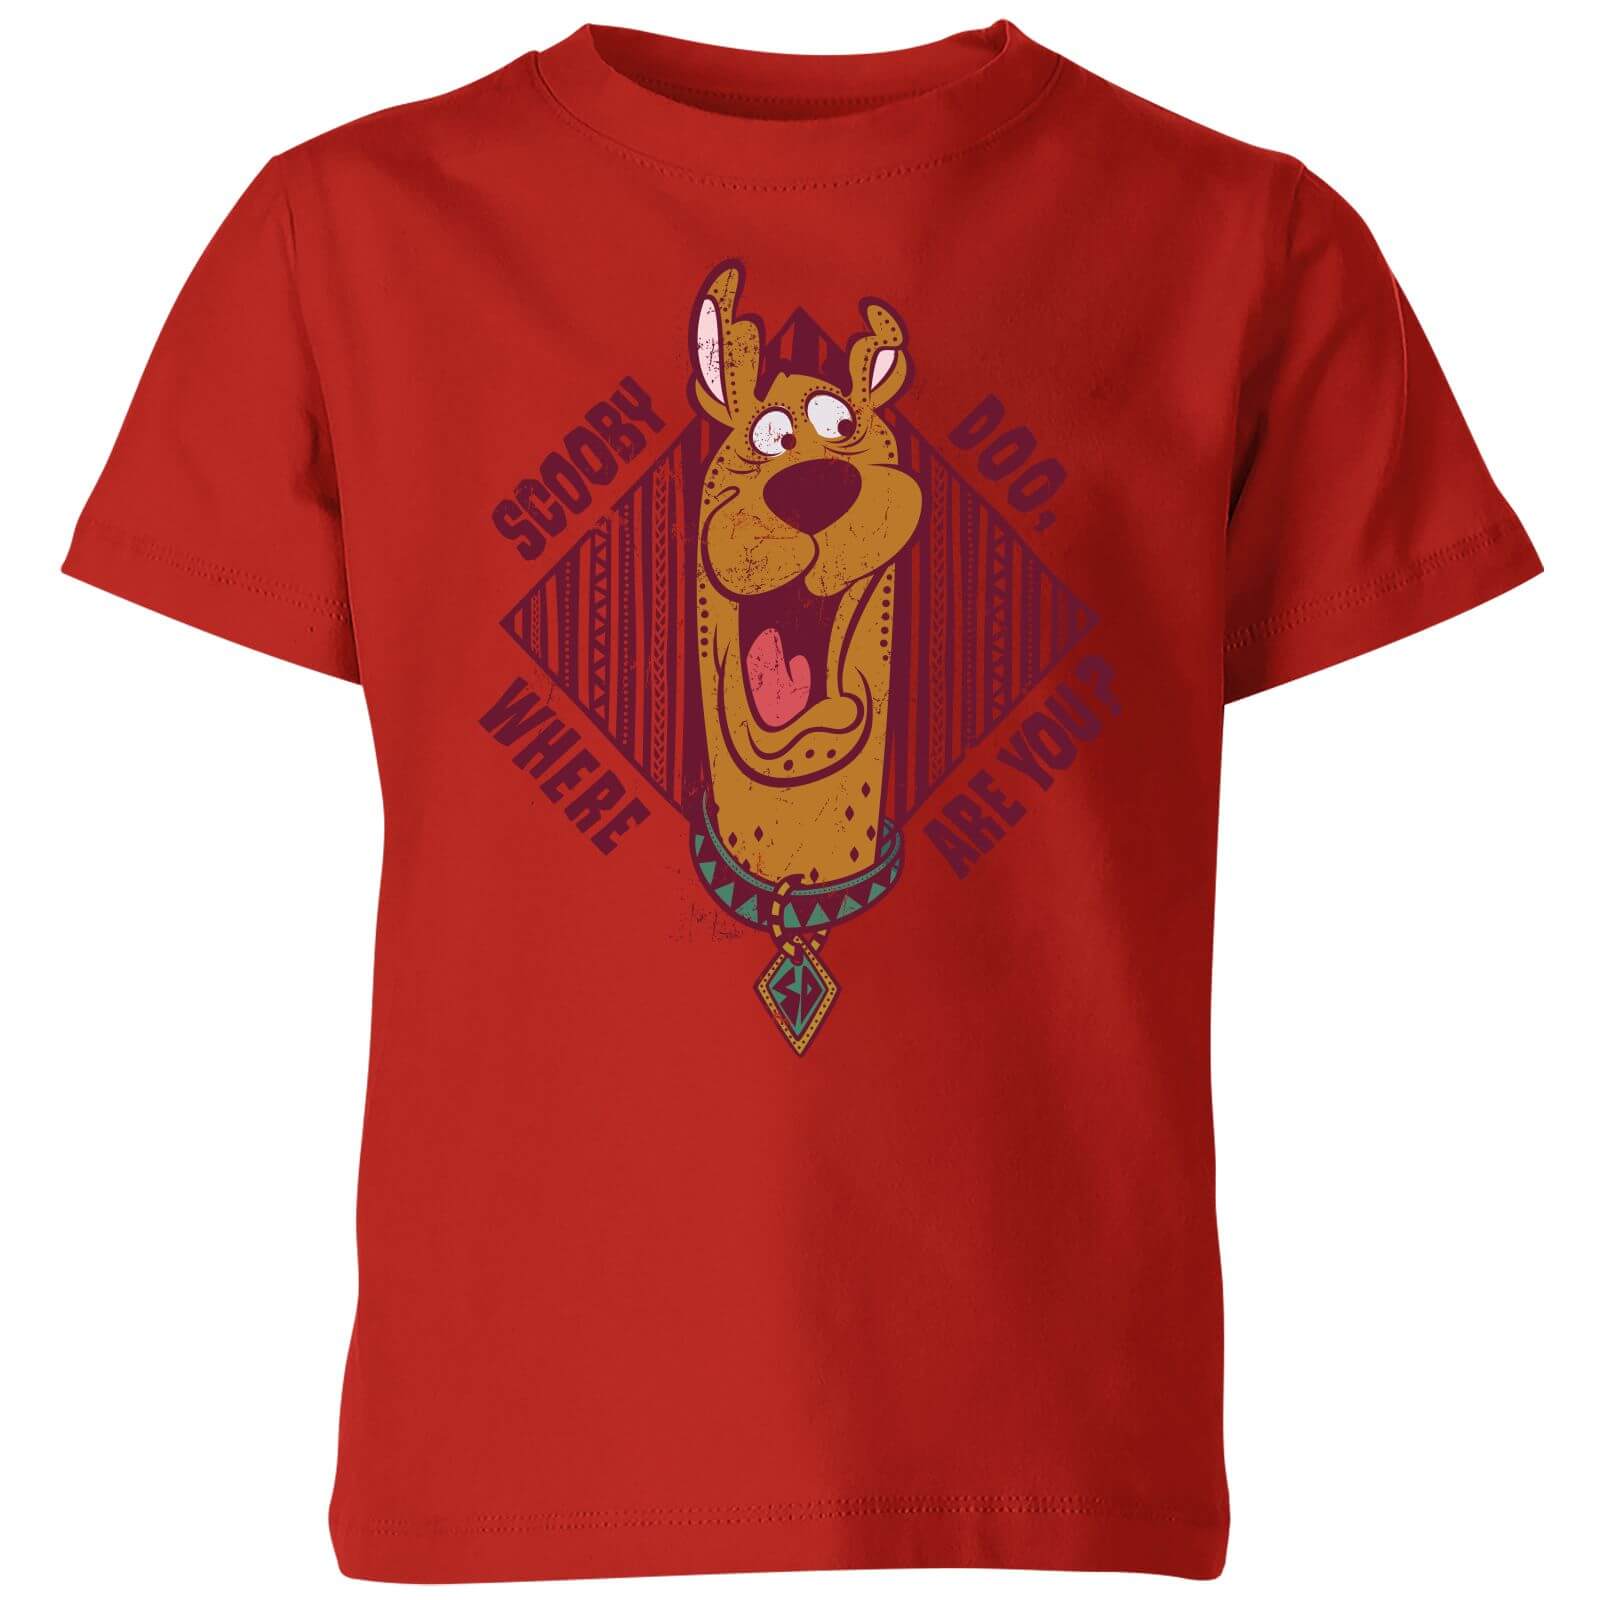 Scooby Doo Where Are You? Kids' T-Shirt - Red - 3-4 Years